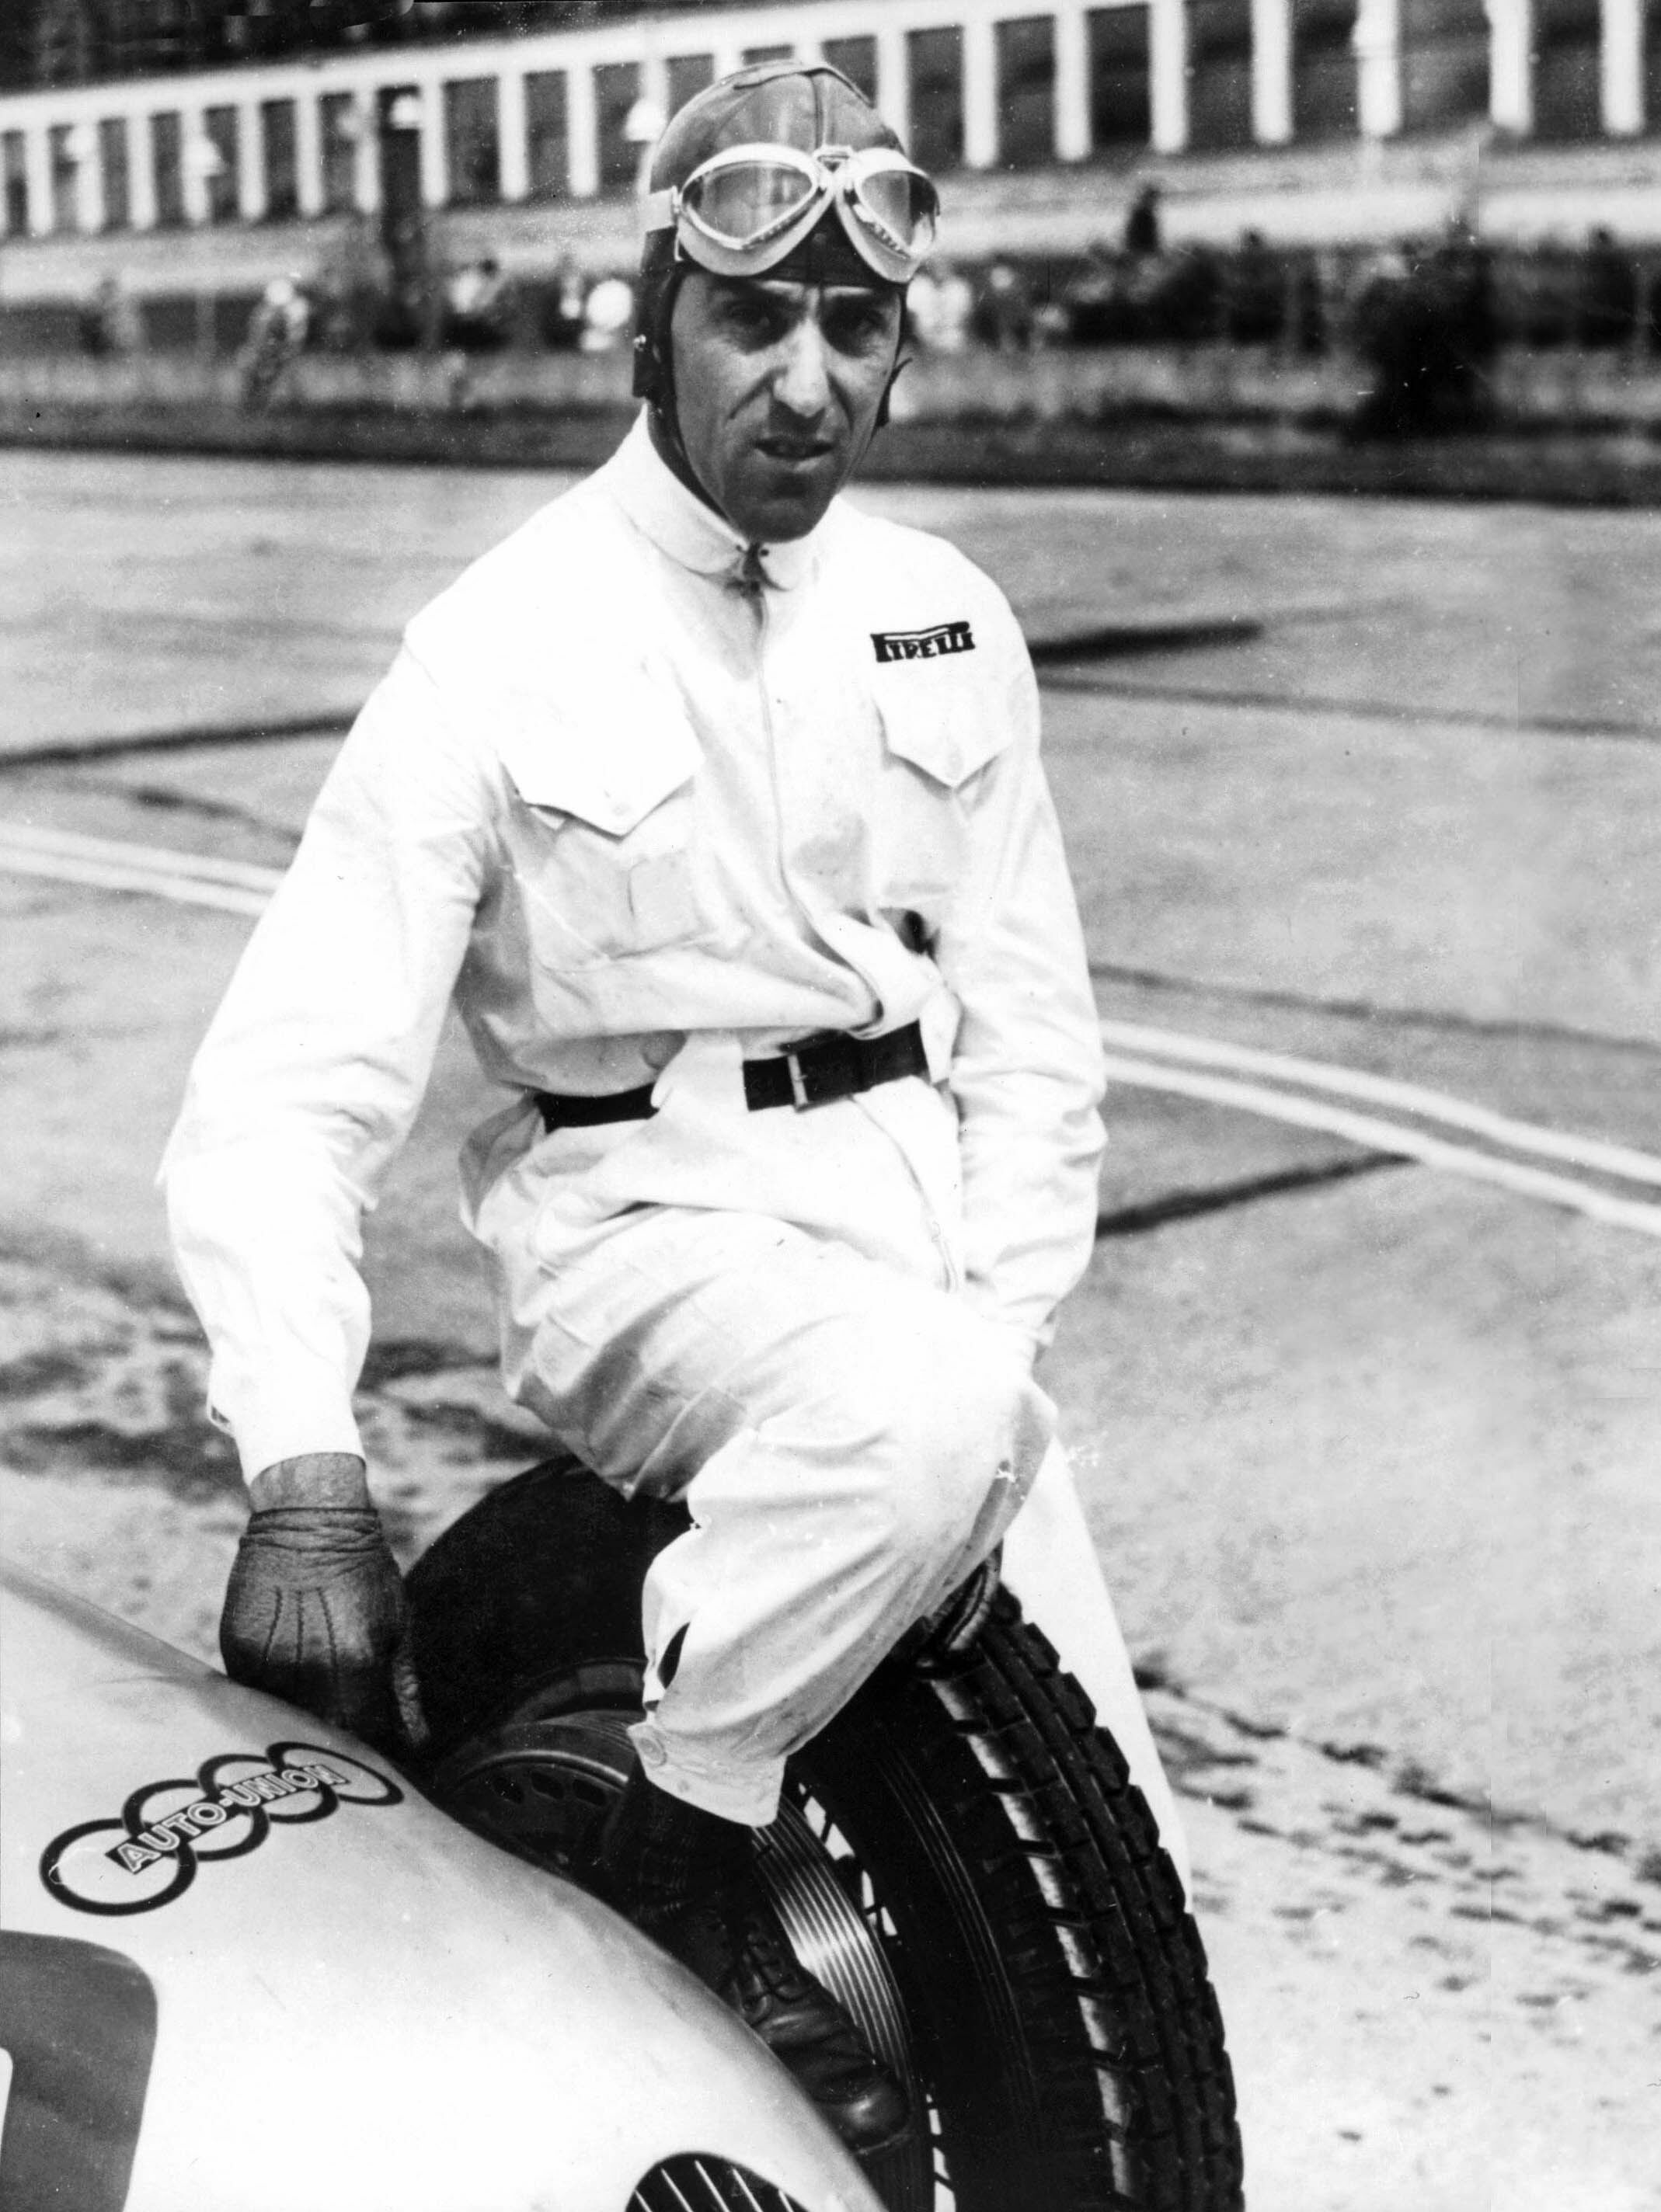 Tazio Nuvolari (born November 16th, 1892, died August 11th, 1953) is one of the greatest race drivers of all times, counting 61 Grand Prix victories and international successes